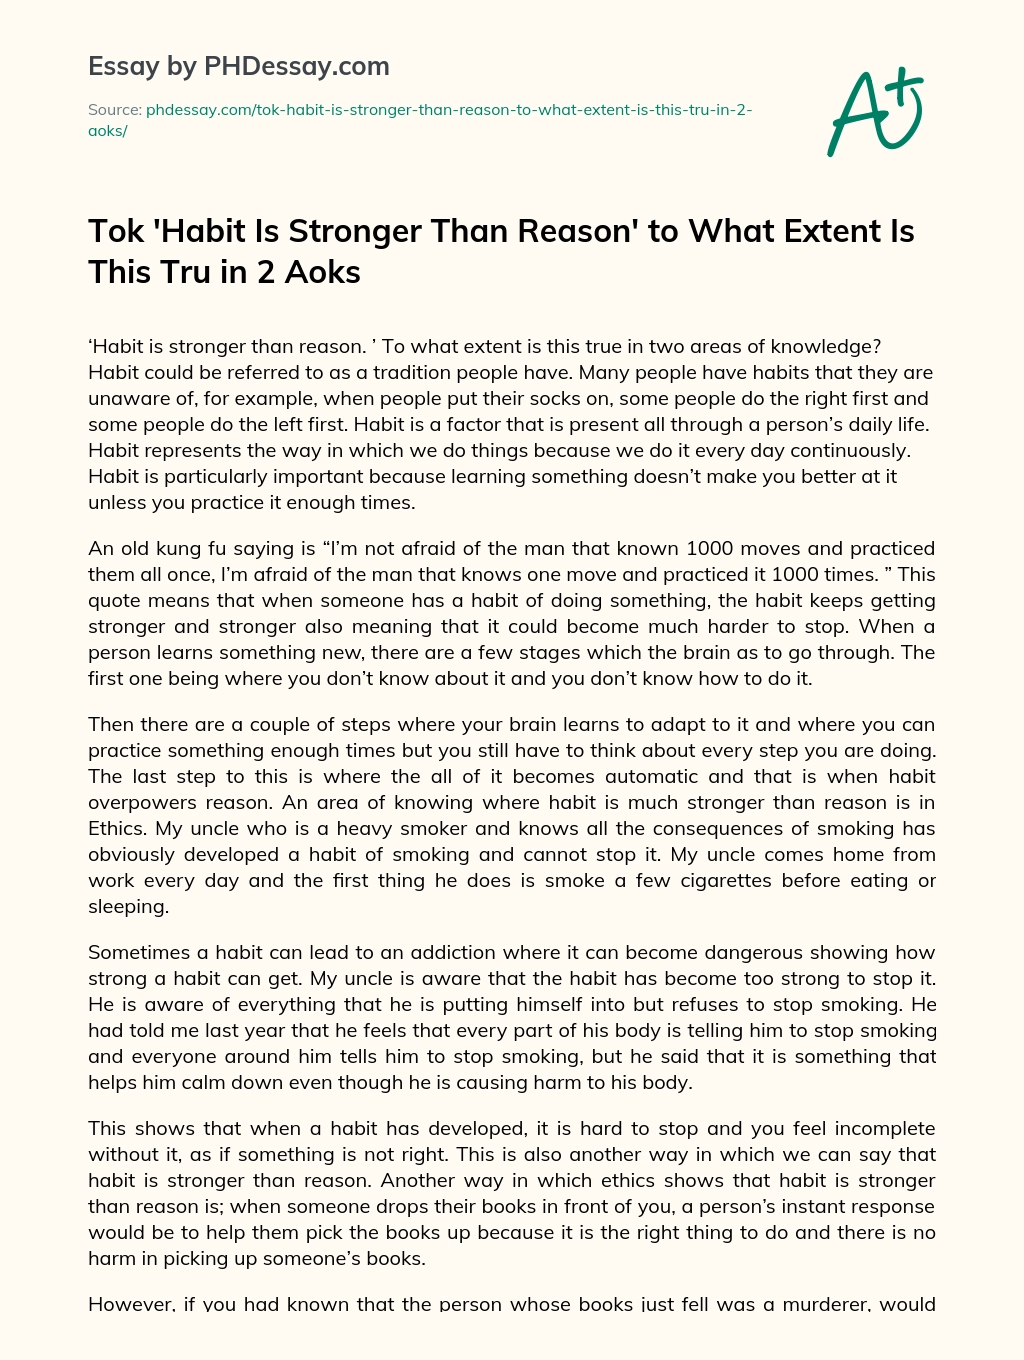 Tok ‘Habit Is Stronger Than Reason’ to What Extent Is This Tru in 2 Aoks essay